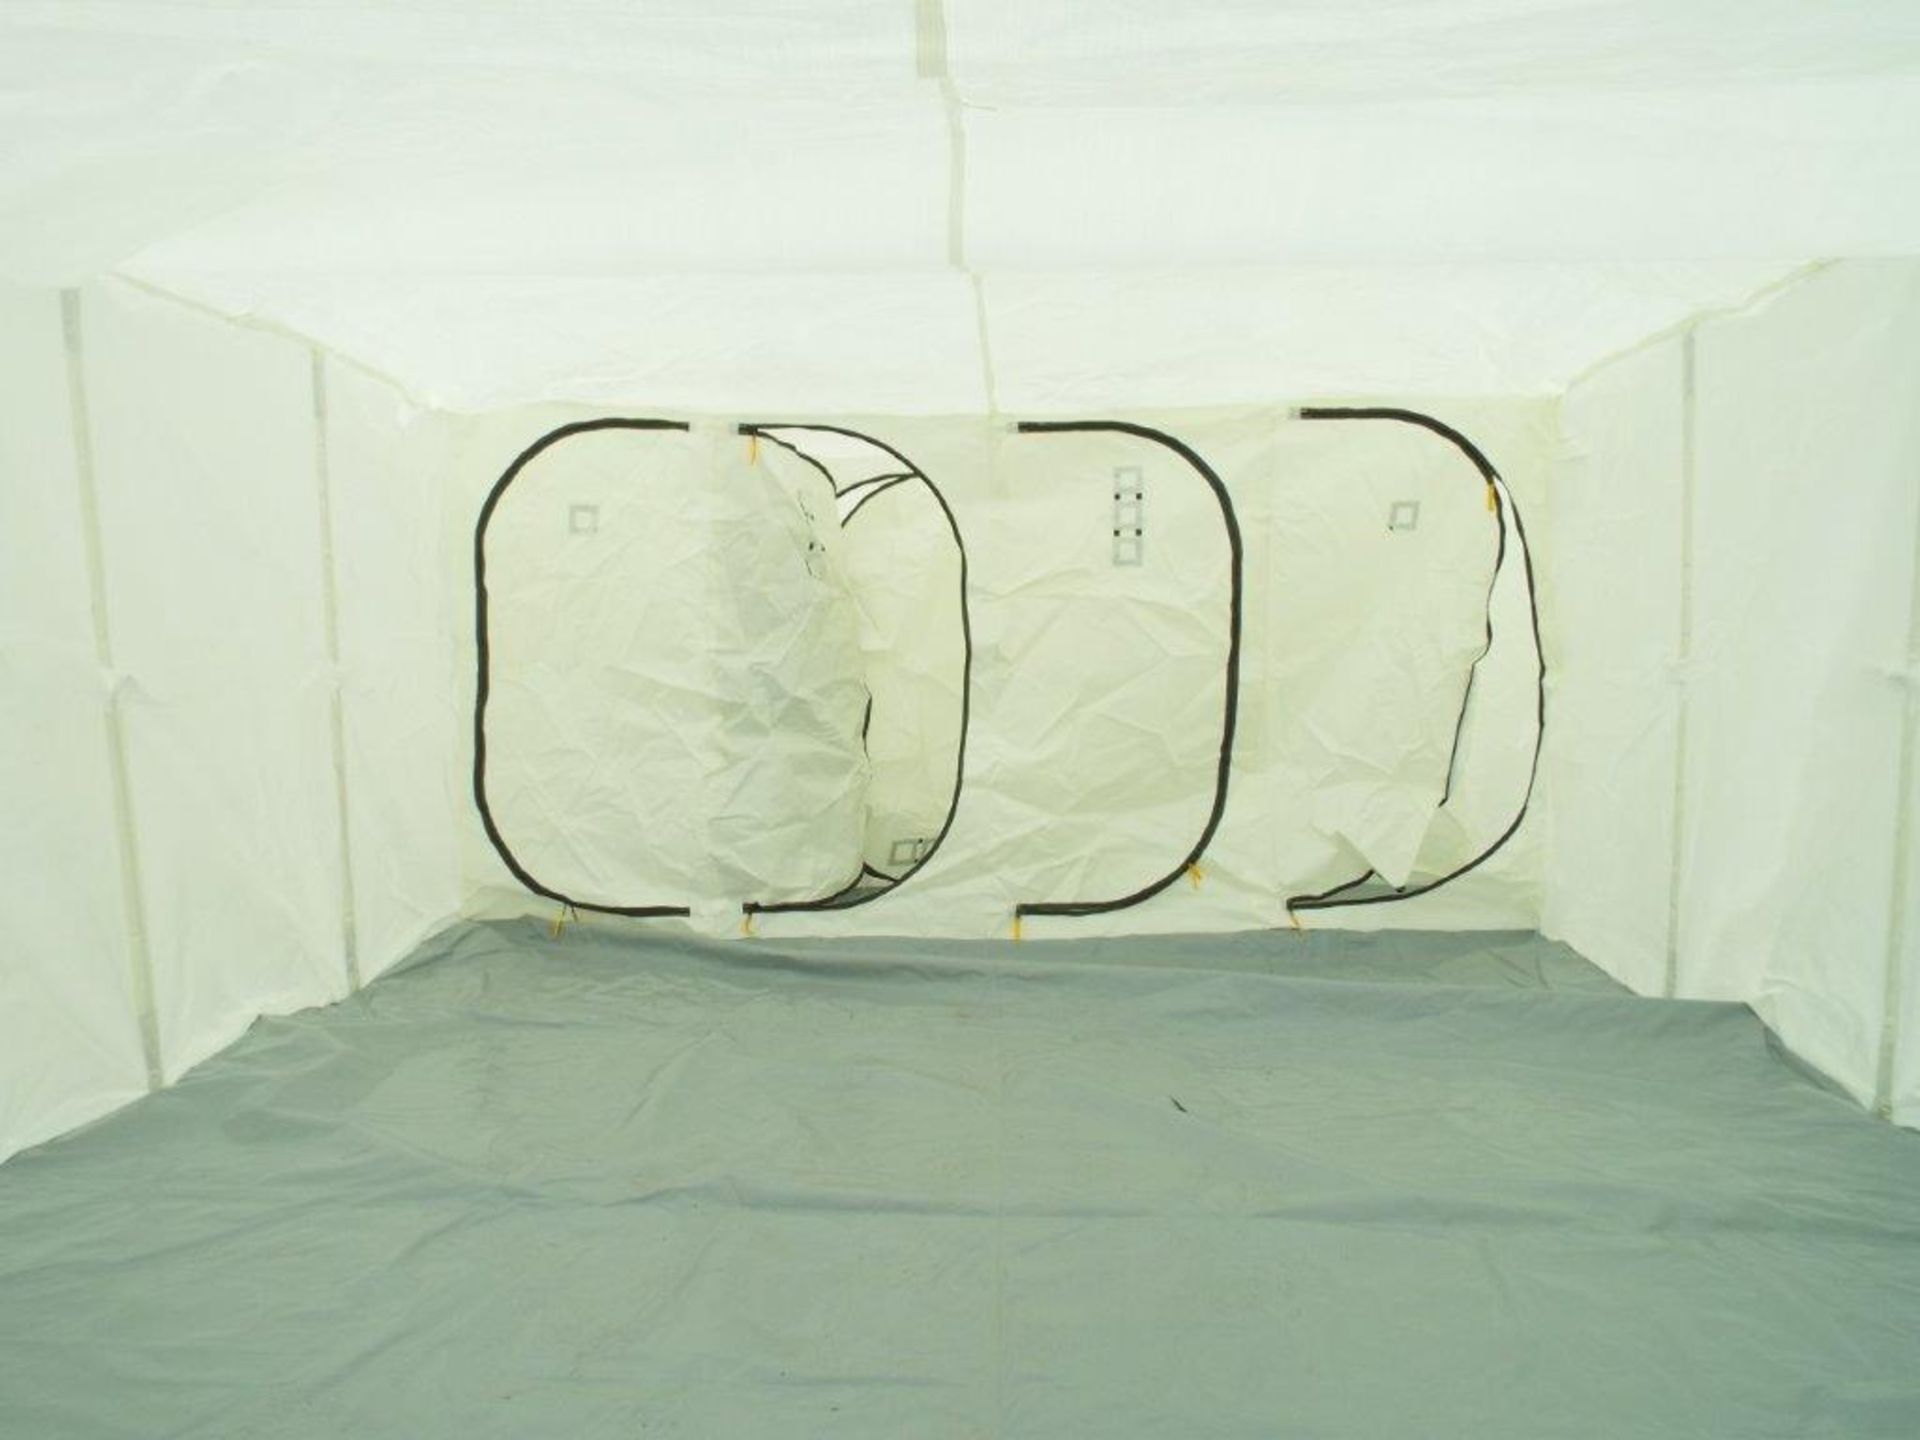 Unissued 8mx4m Inflateable Decontamination/Party Tent - Image 7 of 15